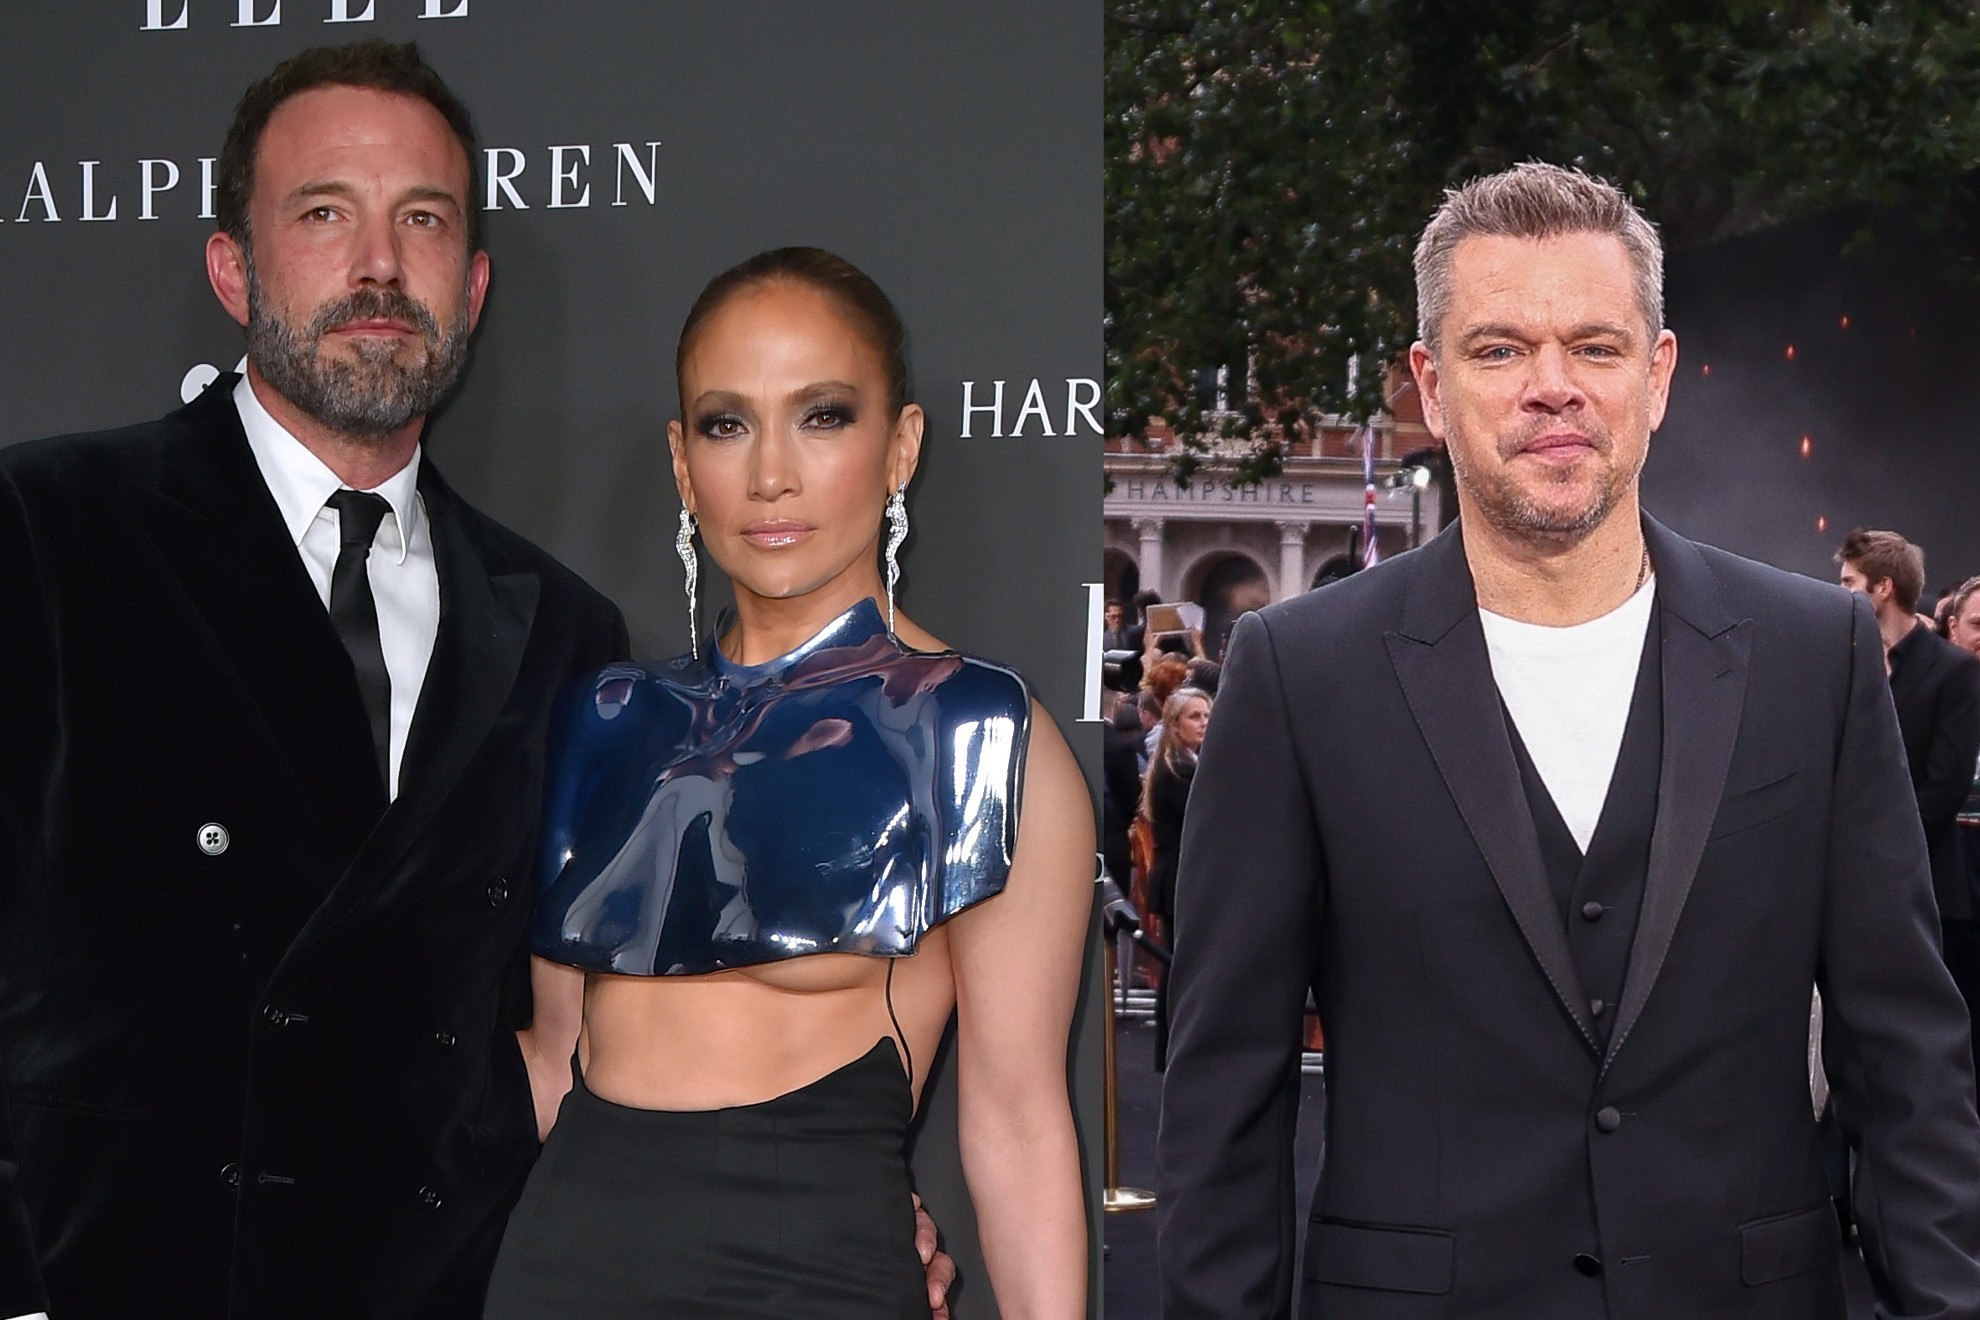 Jennifer Lopez causes tension between Ben Affleck and Matt Damon by being too controlling